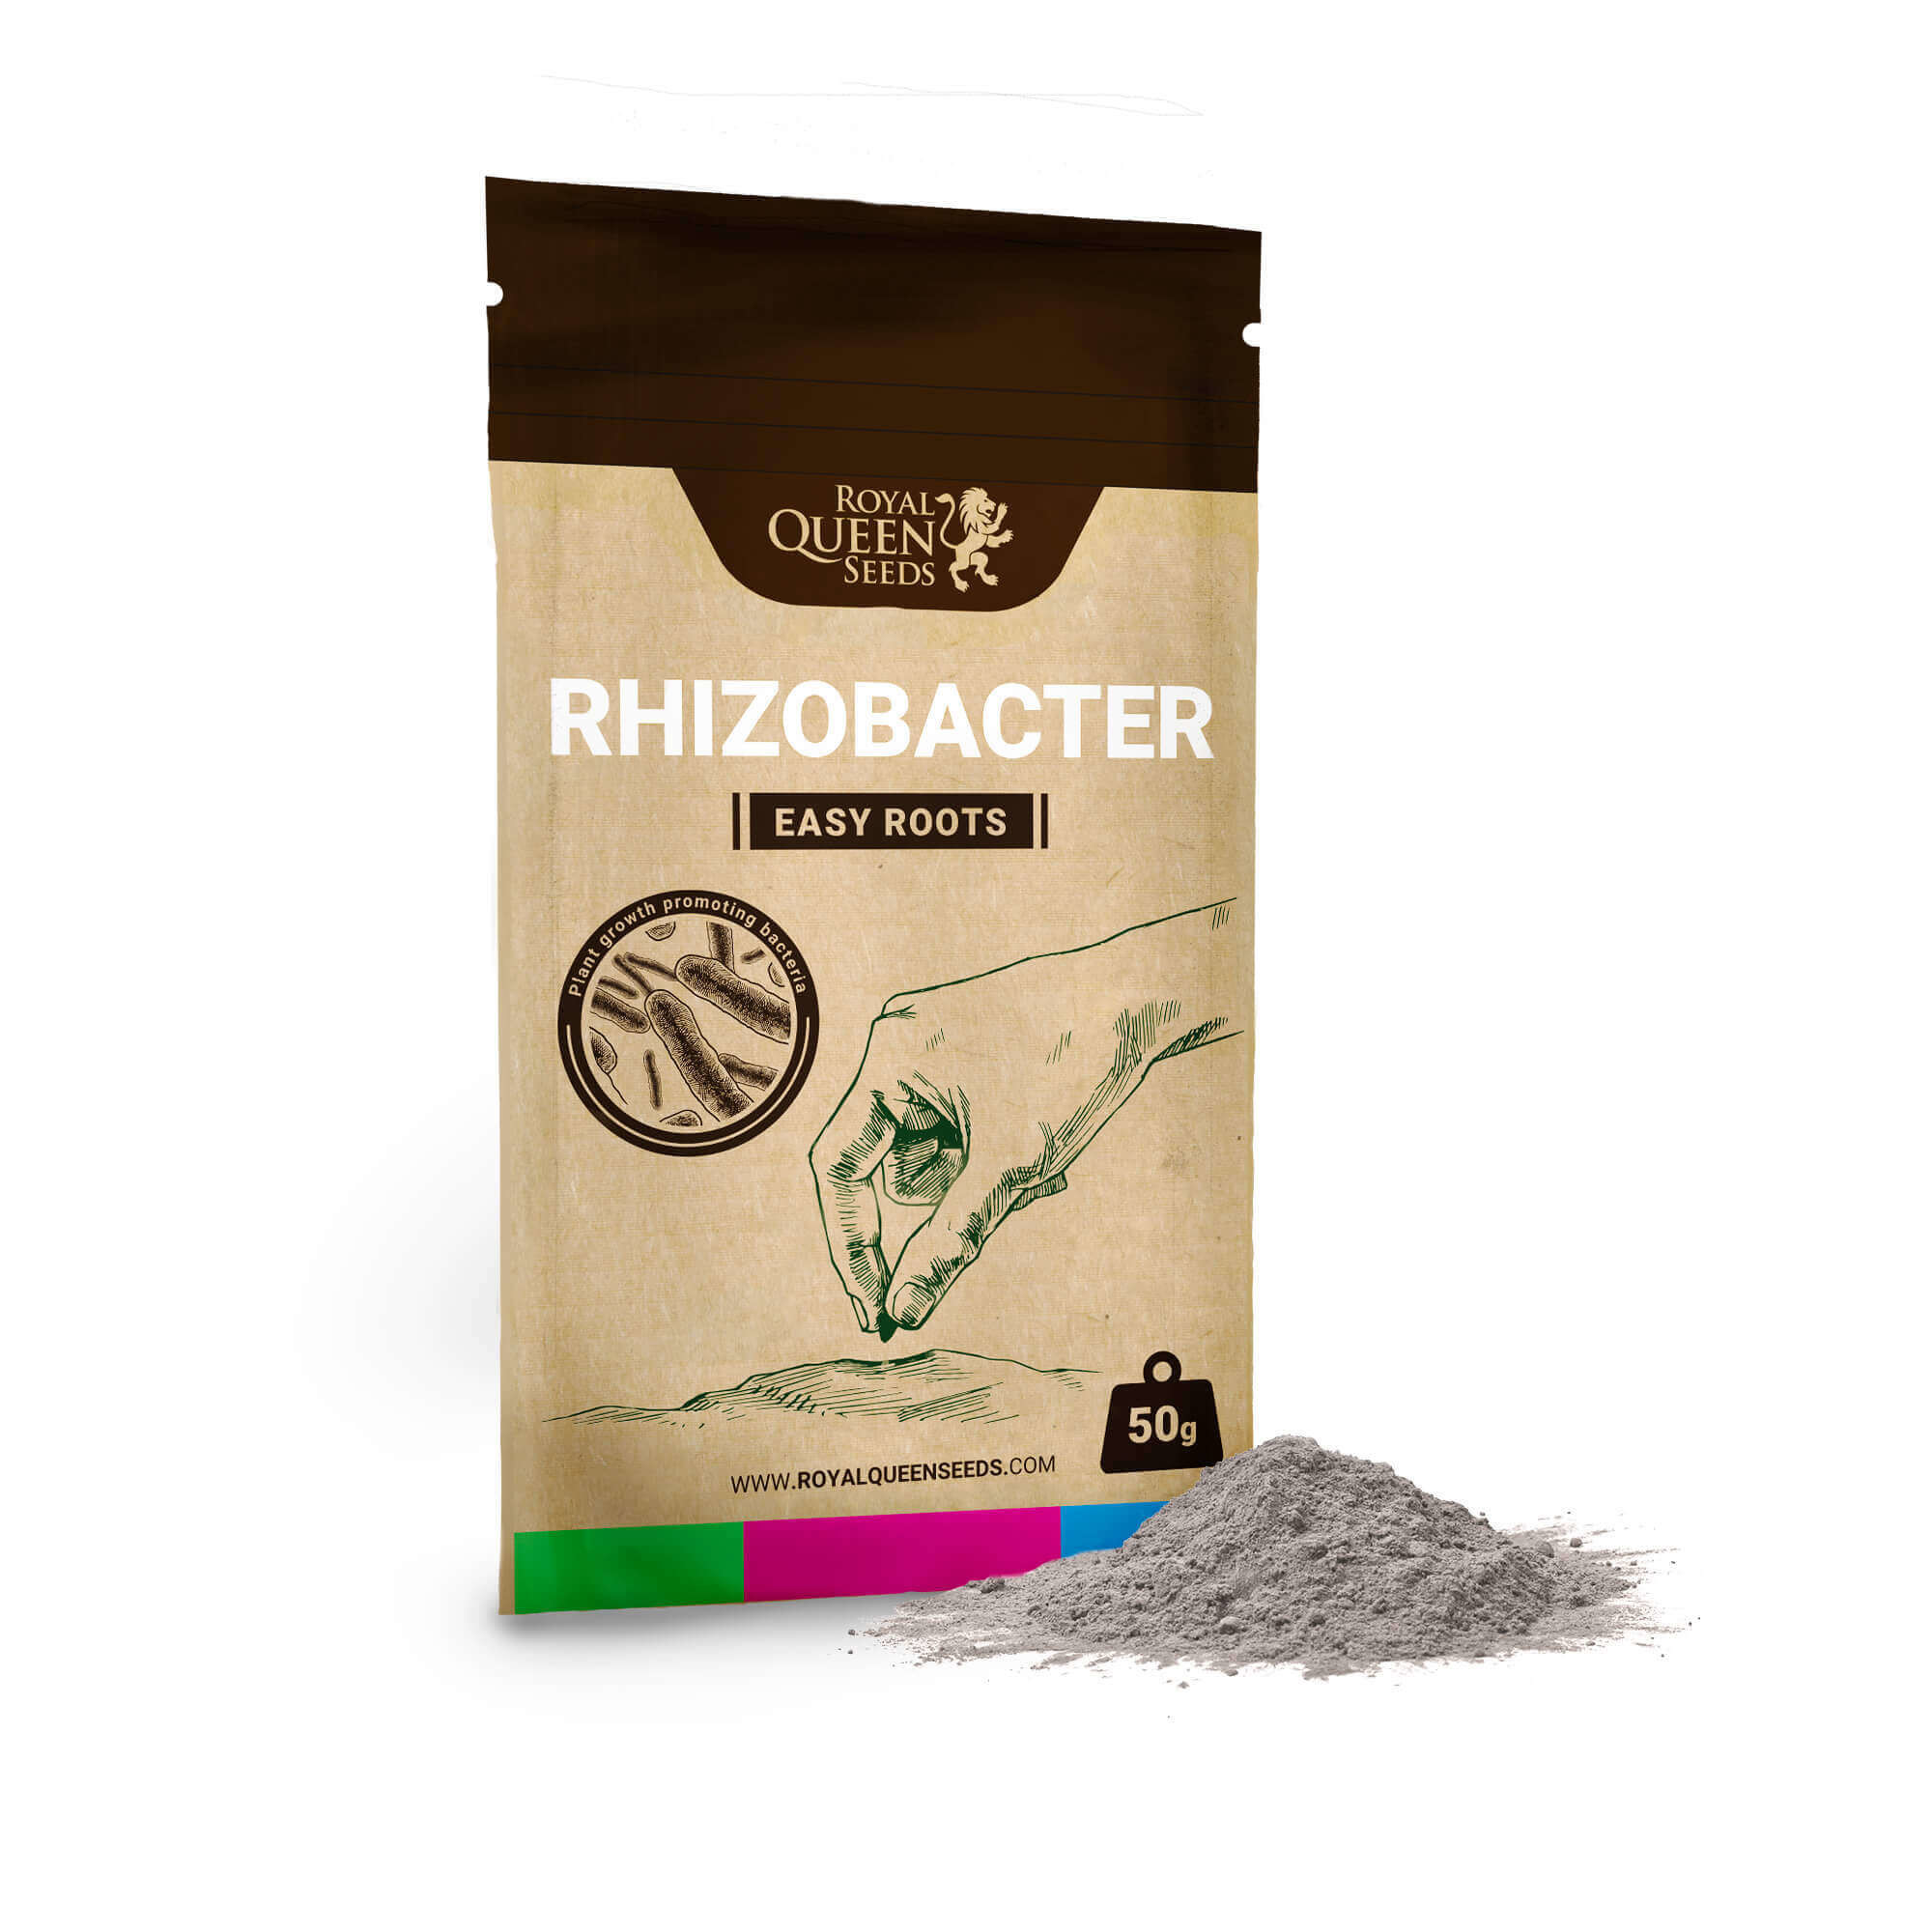 Easy Roots Rhizobacter - Royal Queen Seeds